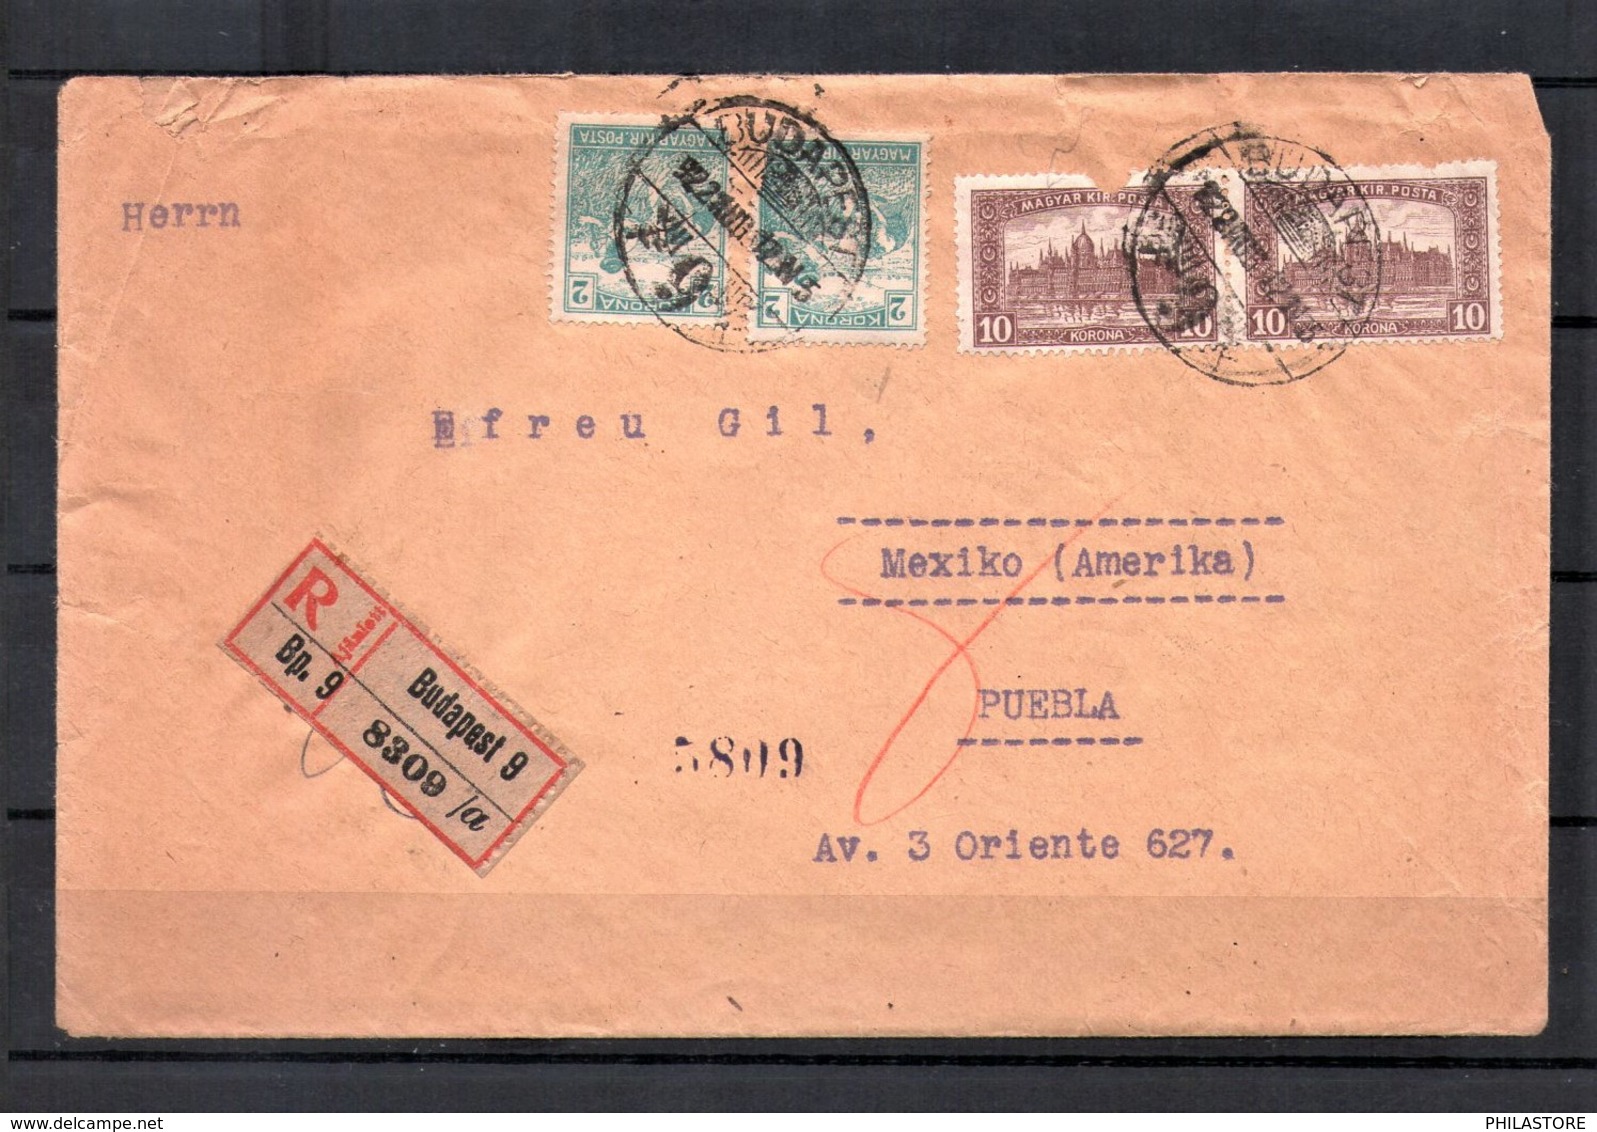 Hungary 1922 Registered Cover Inflation Rate From Budapest To Mexico 1922 AGO 12 24k - Lettres & Documents